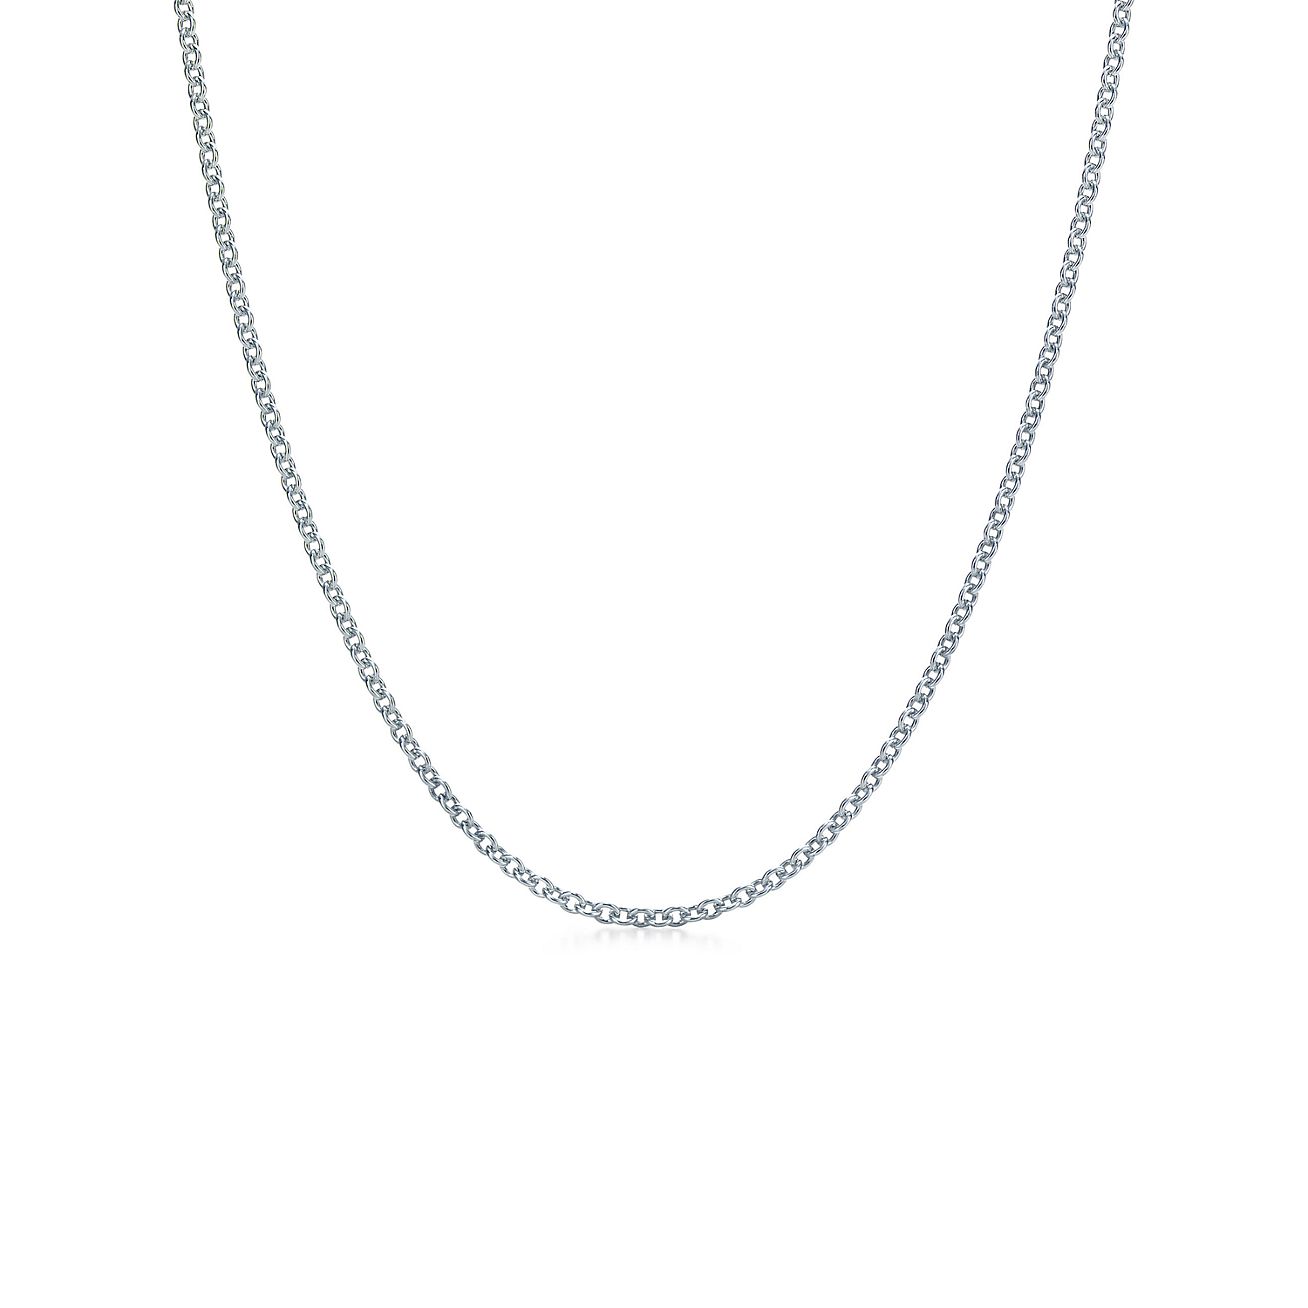 Pendant chain in sterling silver, 30 